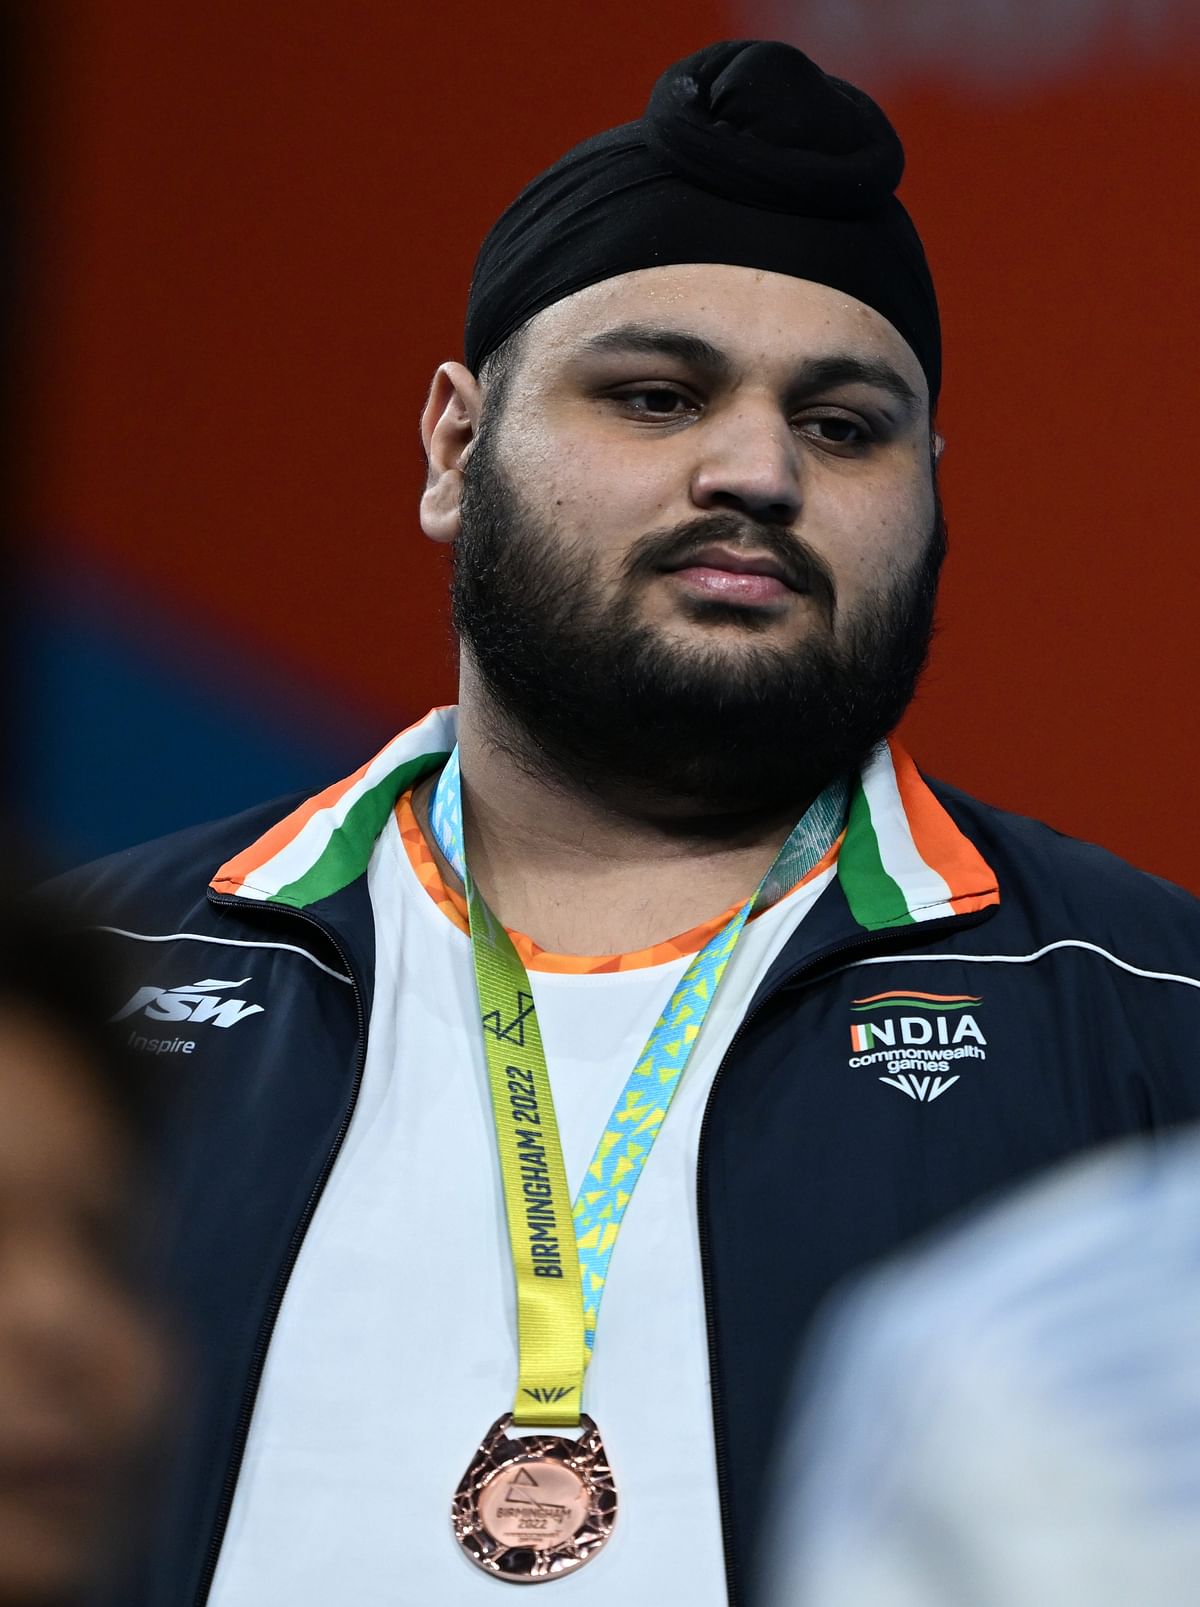 CWG 2022, Day 6 Live: Live Updates from Day 6 of Commonwealth Games 2022